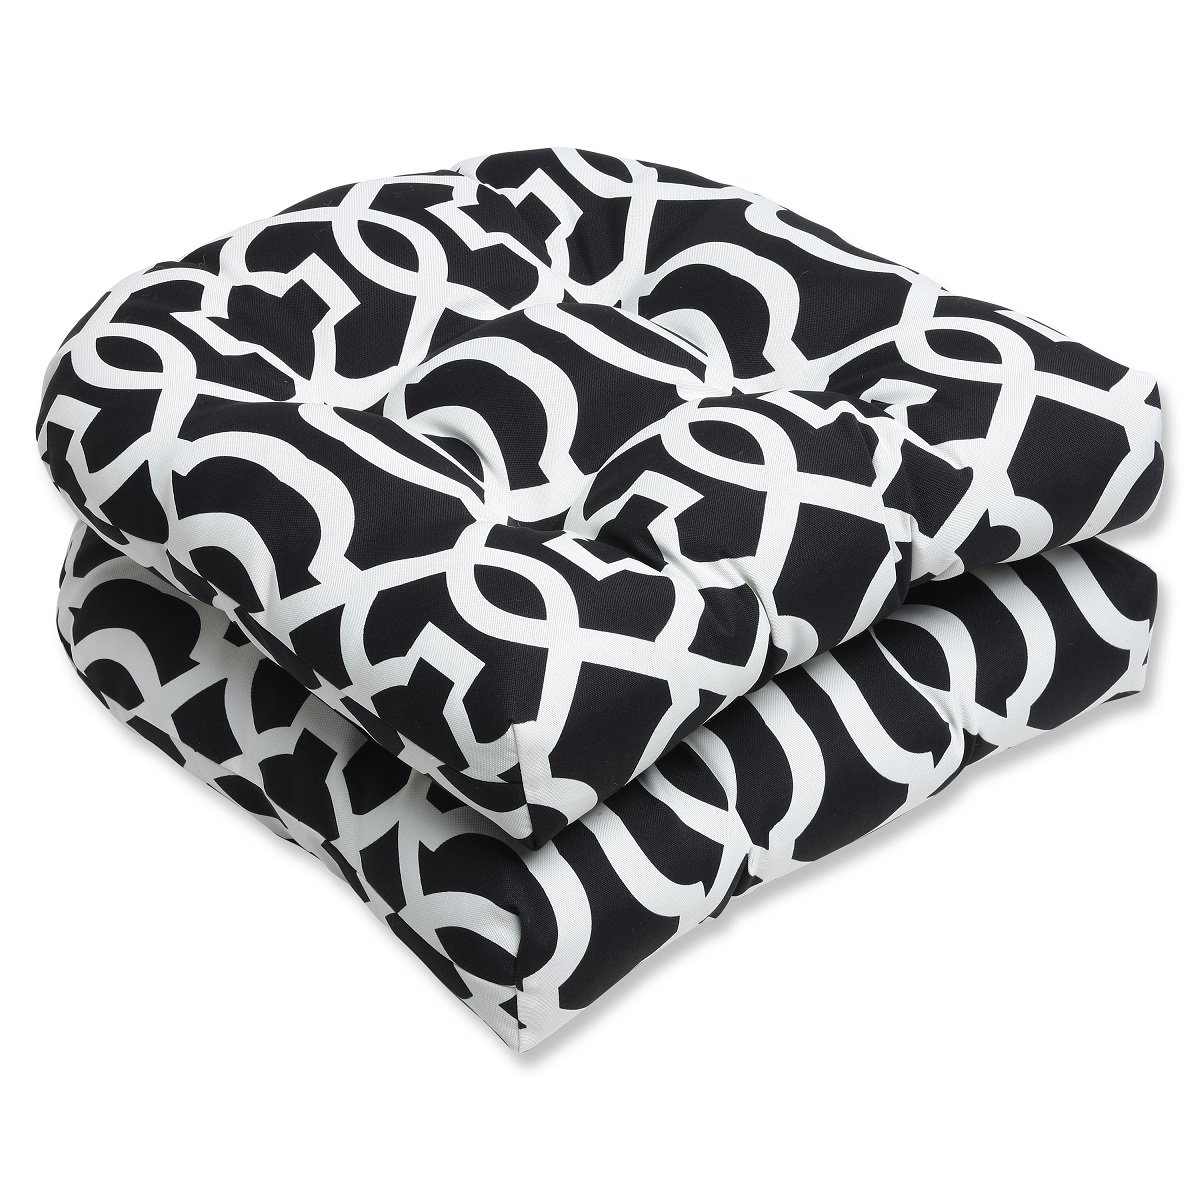 Pillow Perfect Set of 2 Black and White Geometric Outdoor Patio Tufted Wicker Chair Cushions 19"